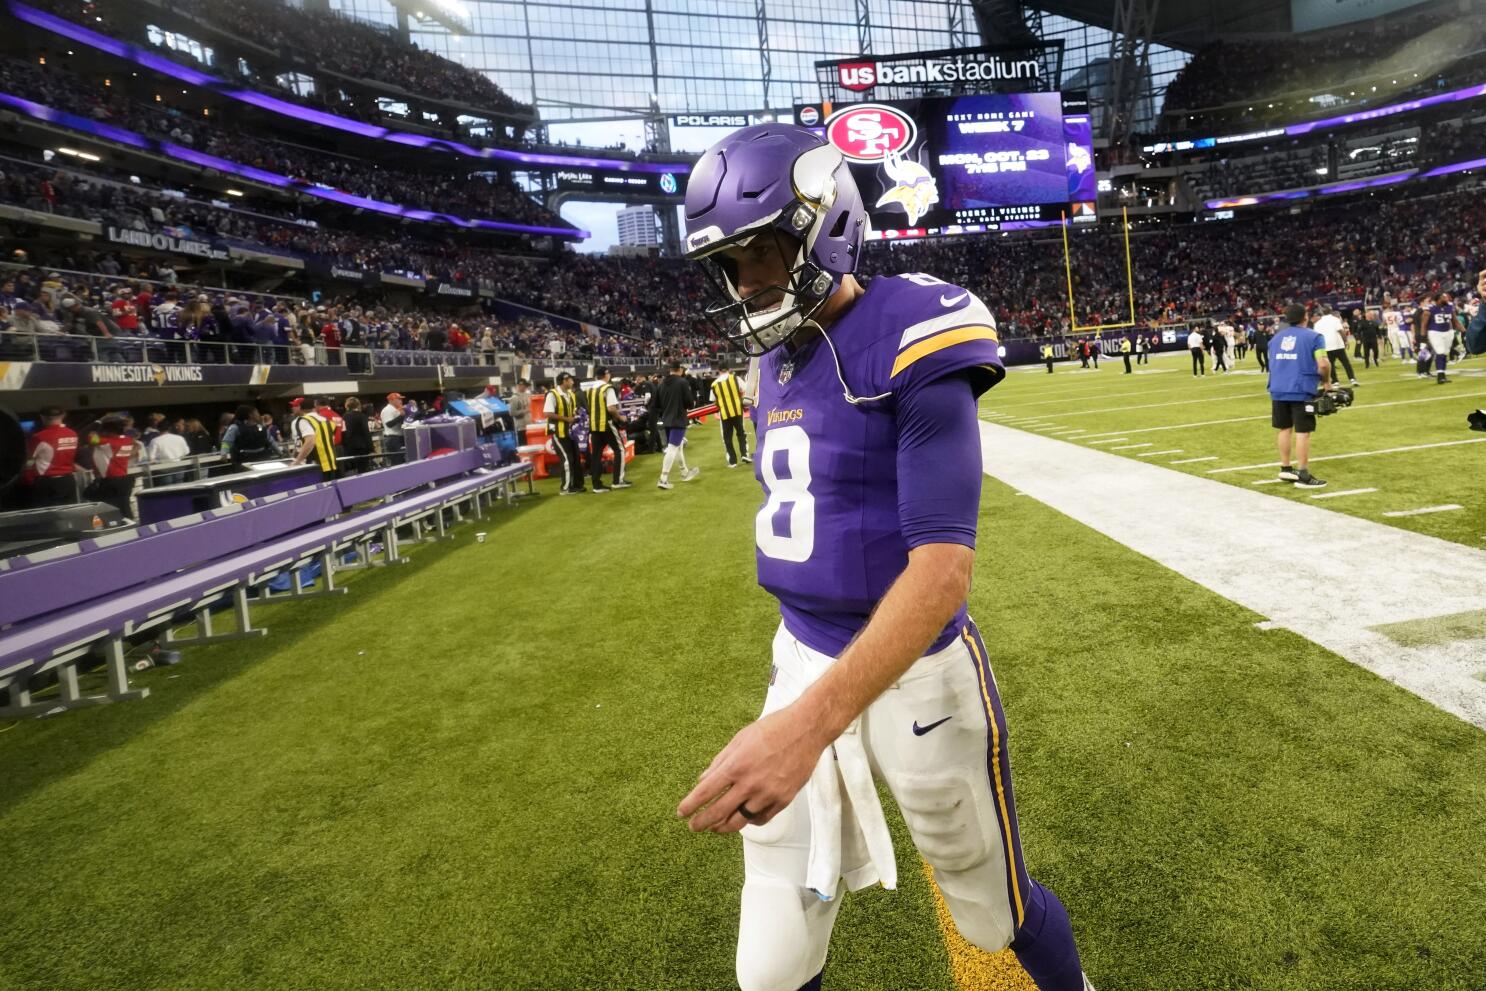 Vikings' offense out of sync as the team equals loss total from last season  - The San Diego Union-Tribune